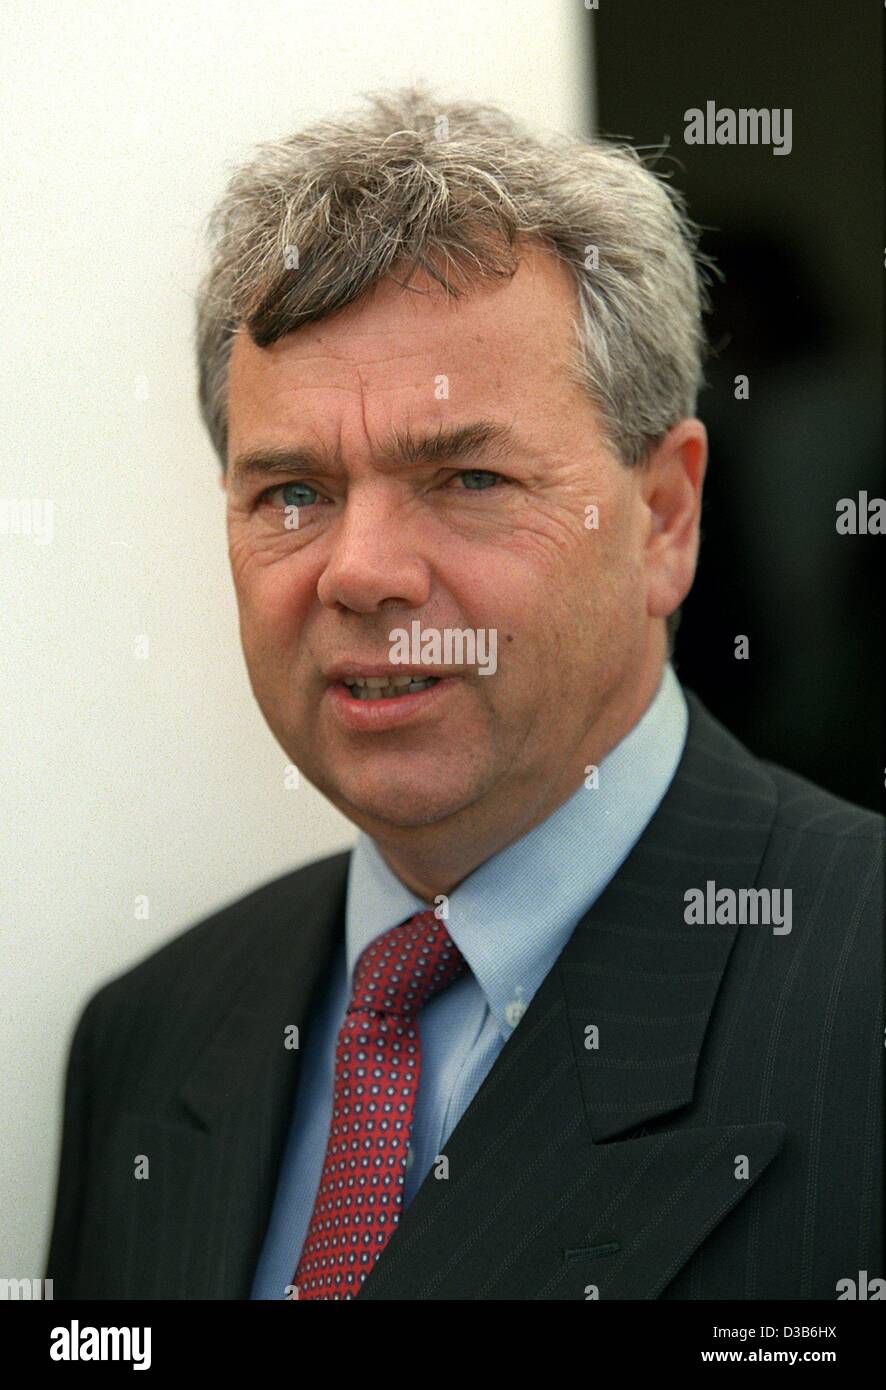 dpa) - Peter Oakley, board member of the German chemical group BASF,  pictured in Mainz, Germany, August 2002. The world's biggest chemical group  achieved a gain of 9.5 per cent in the